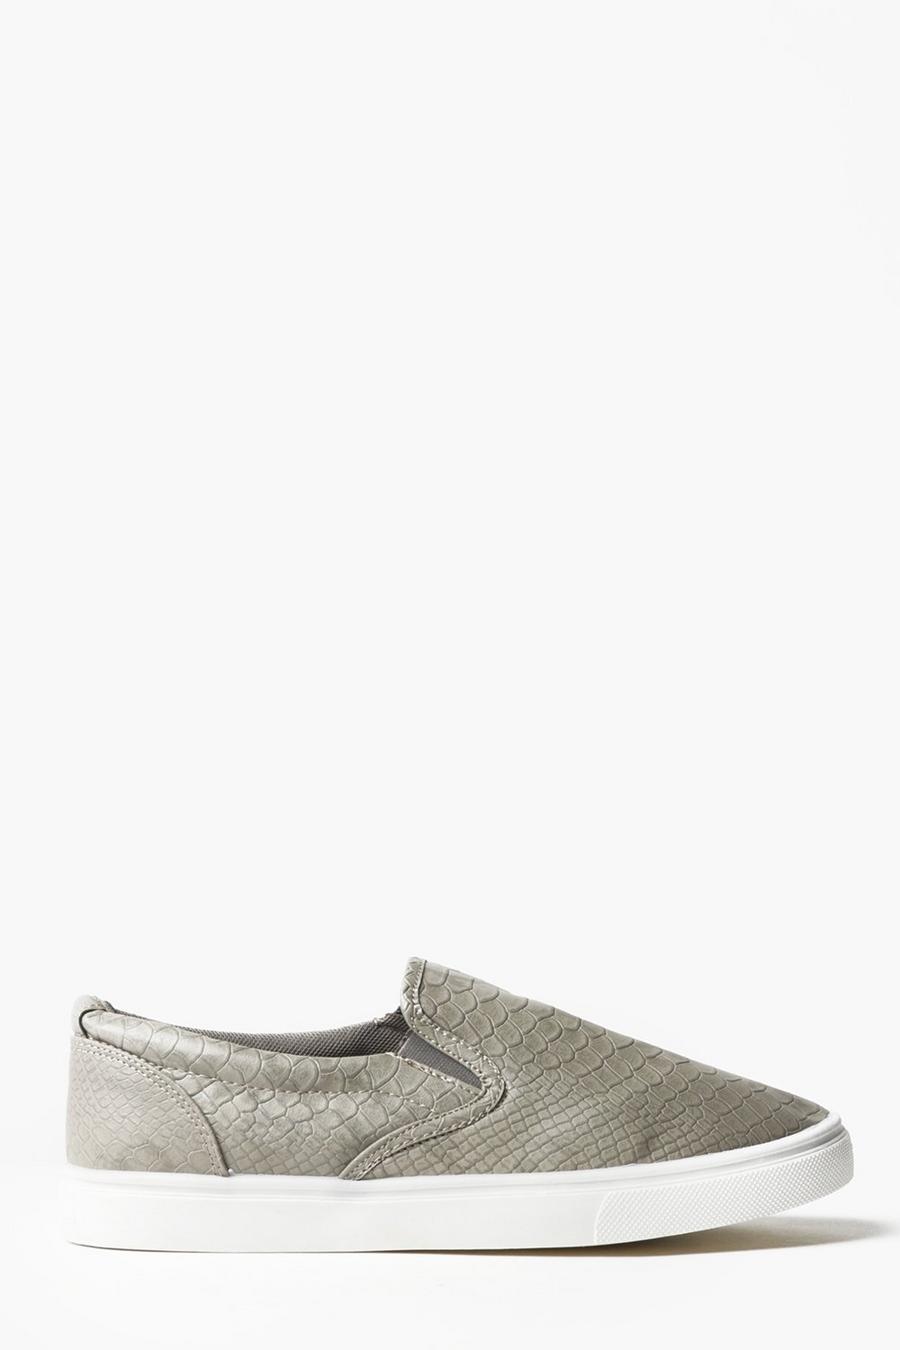 Grey Faux Snake Skin Slip On Trainers image number 1